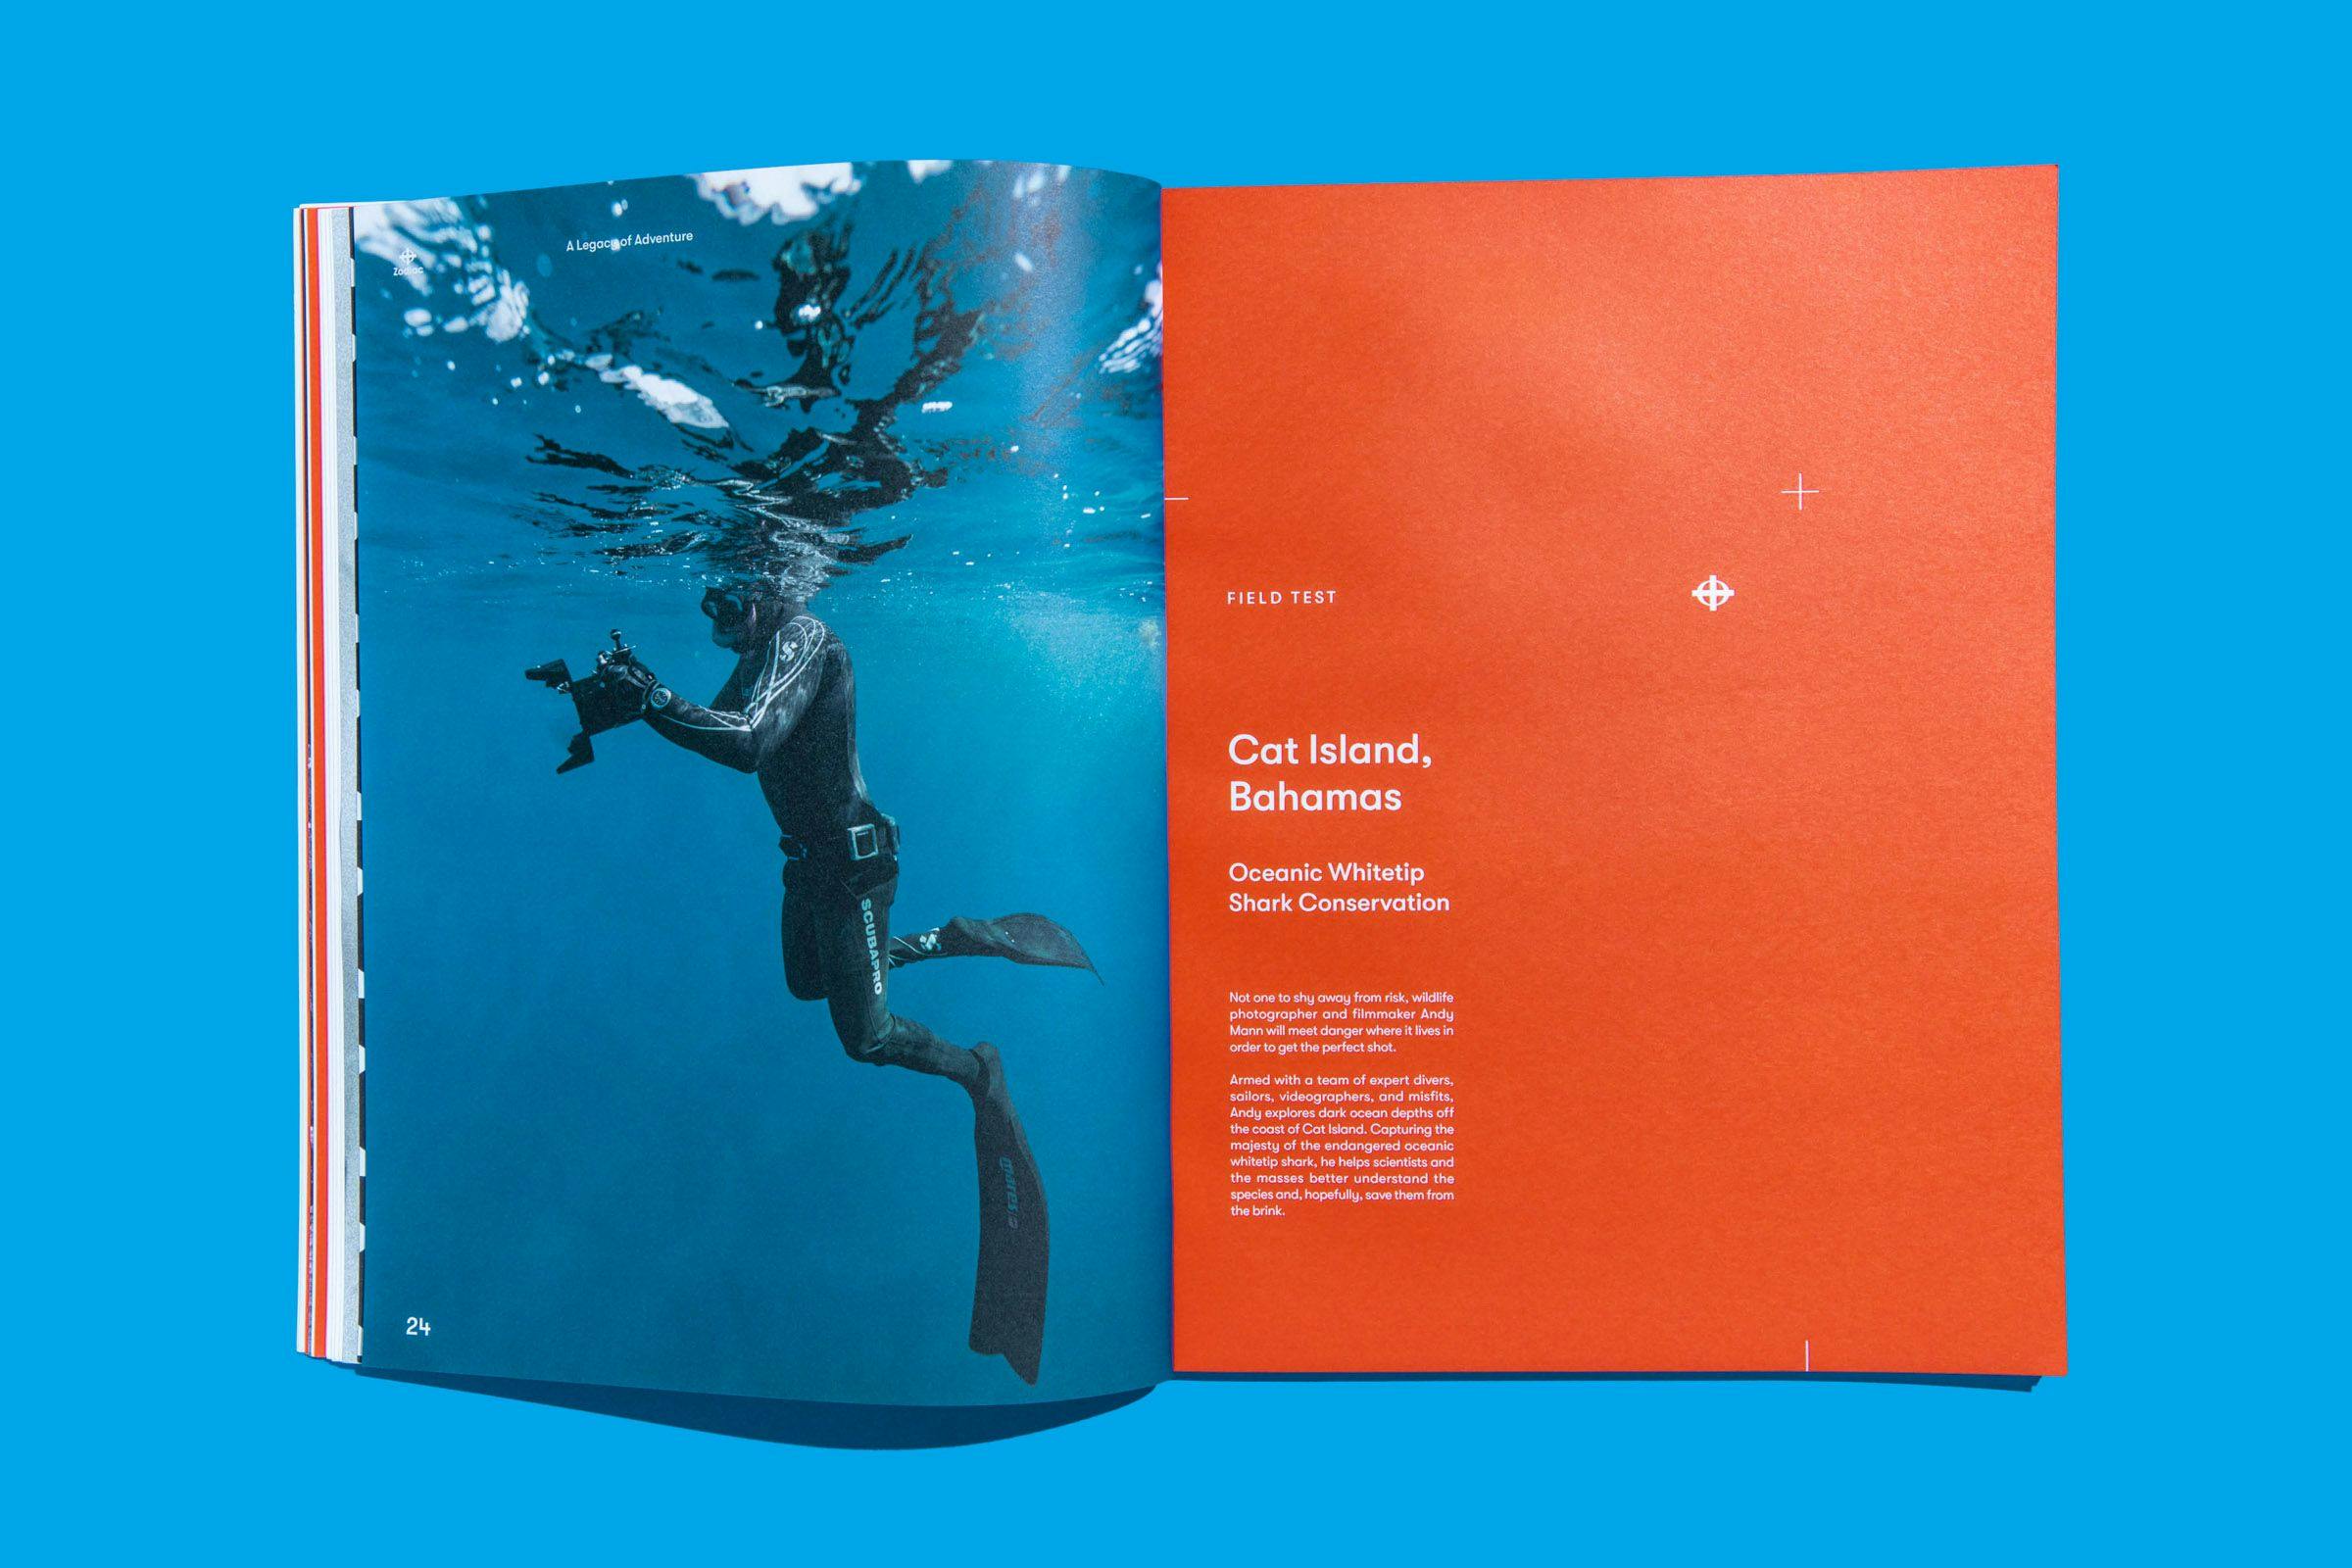 Vibrant pages from the Zodiac Watches: Brand Book showing a diver in a body of water